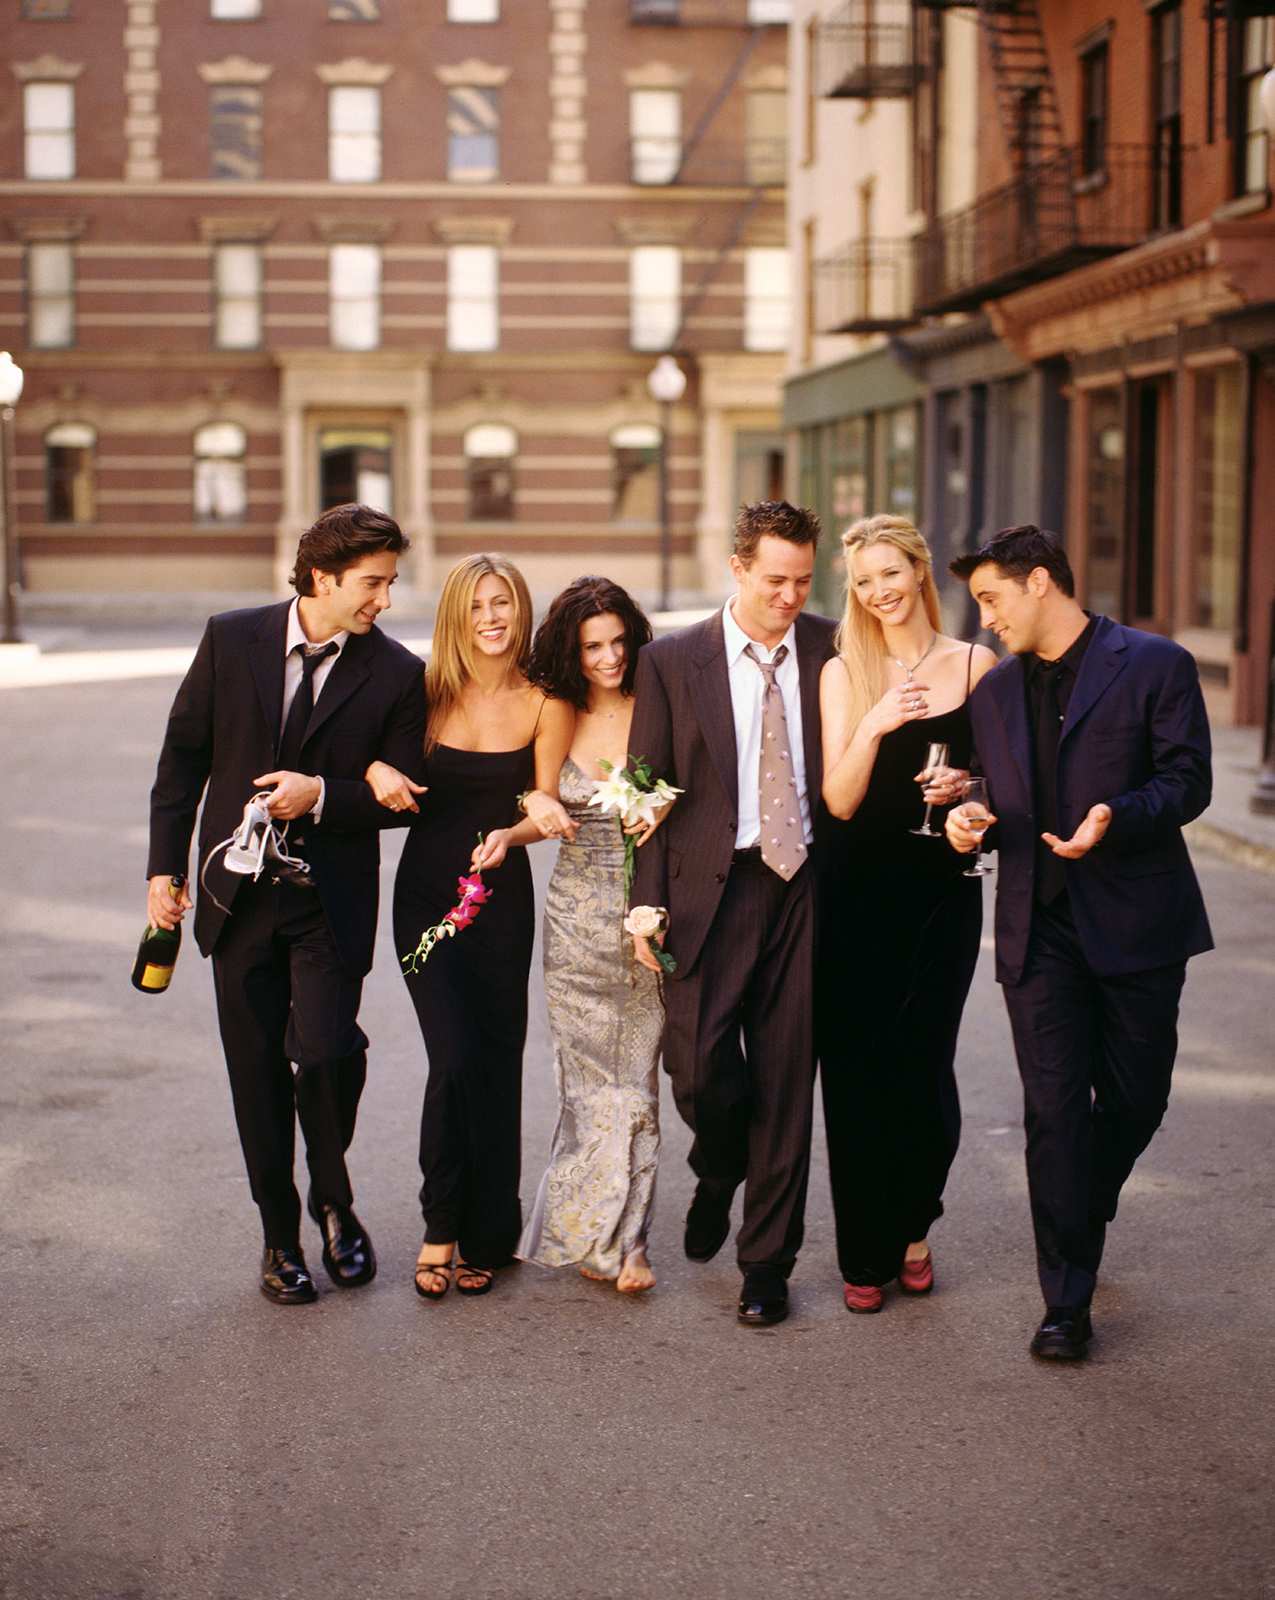 Matthew Perry's 'Friends' co-stars react to his 'unfathomable' death in shared statement